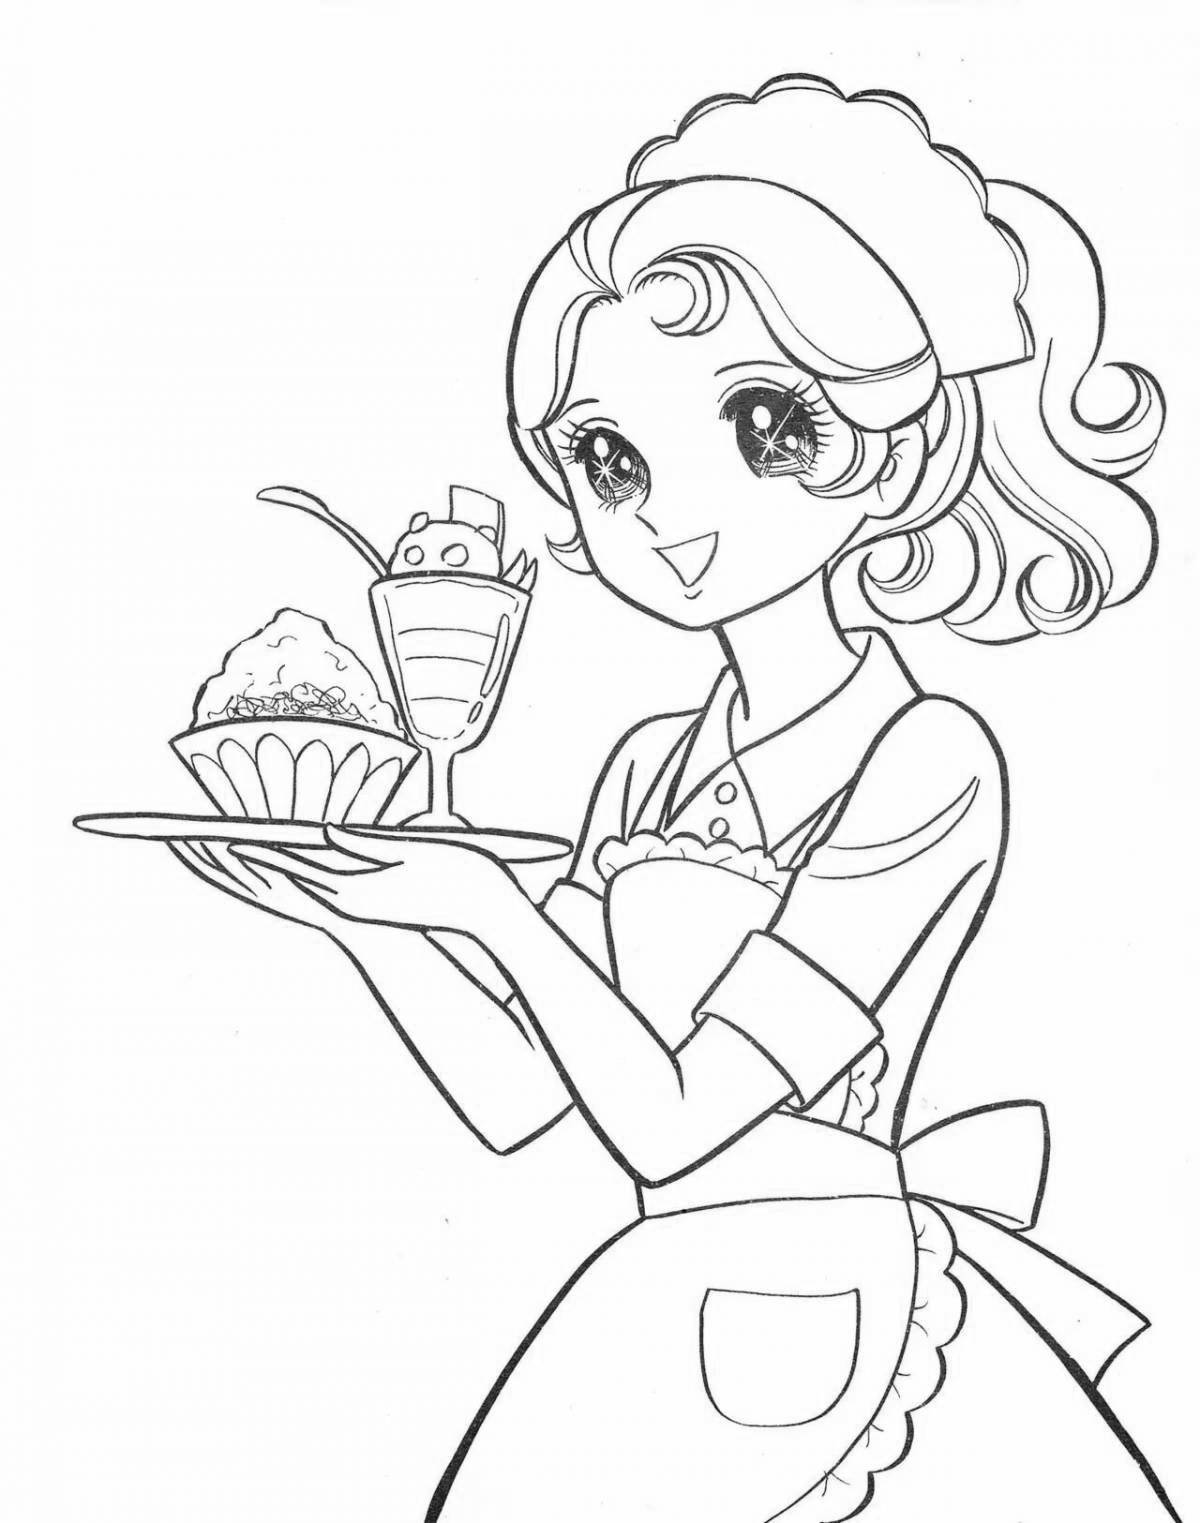 Confectioner's holiday coloring page